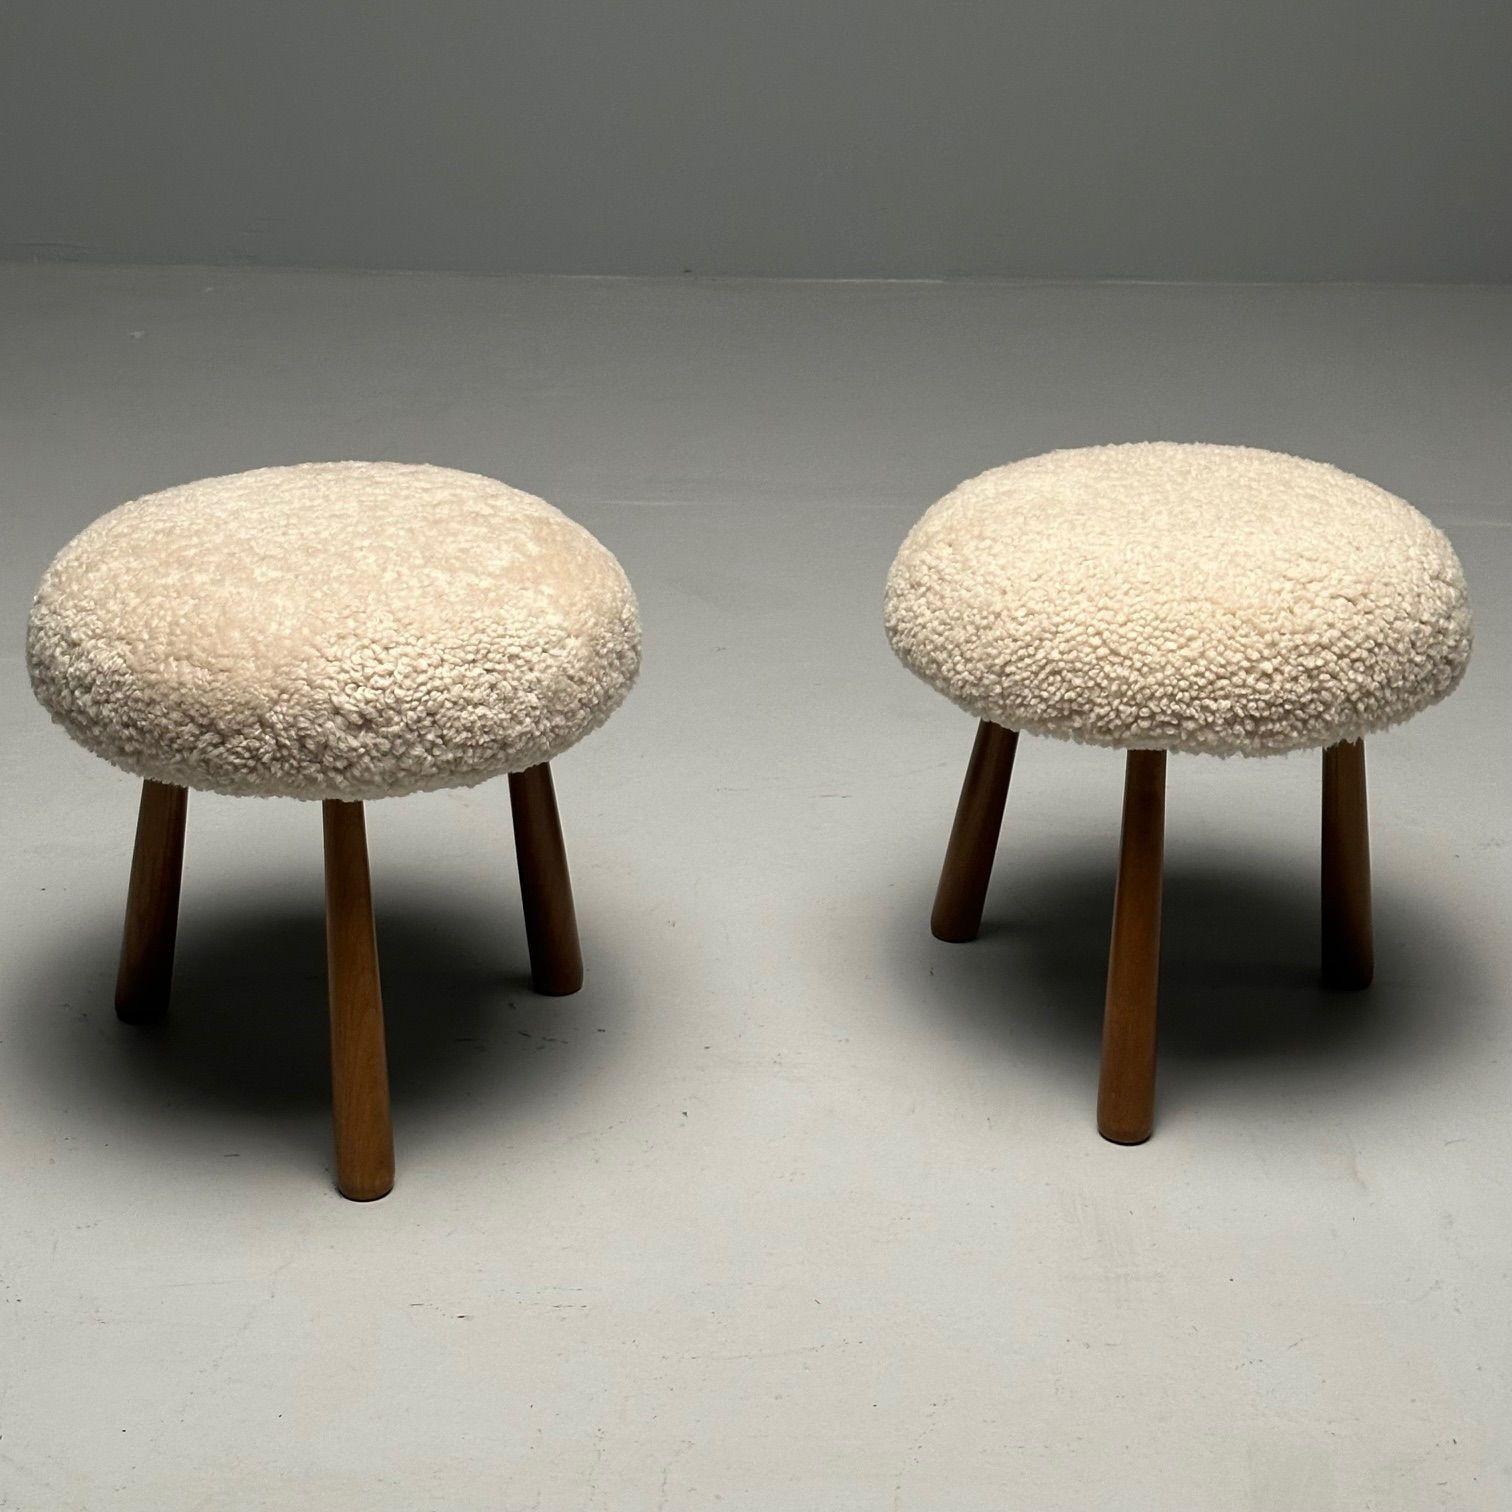 Pair Contemporary Sheepskin Stools / Ottomans, Swedish Modern Style, Shearling For Sale 2